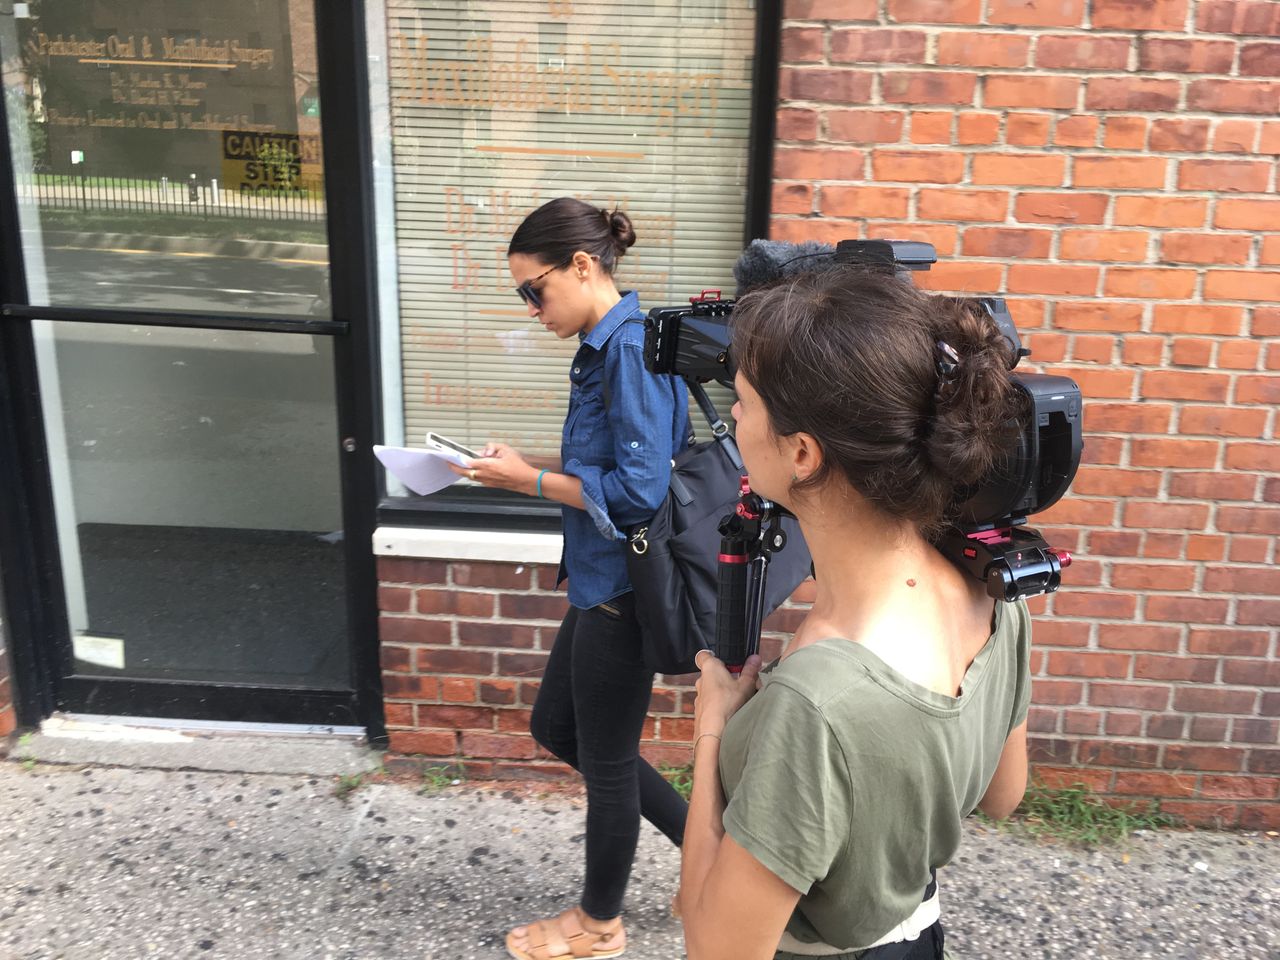 Filmmaker Rachel Lears (right) films then-congressional candidate Alexandria Ocasio-Cortez during production for "Knock Down the House."